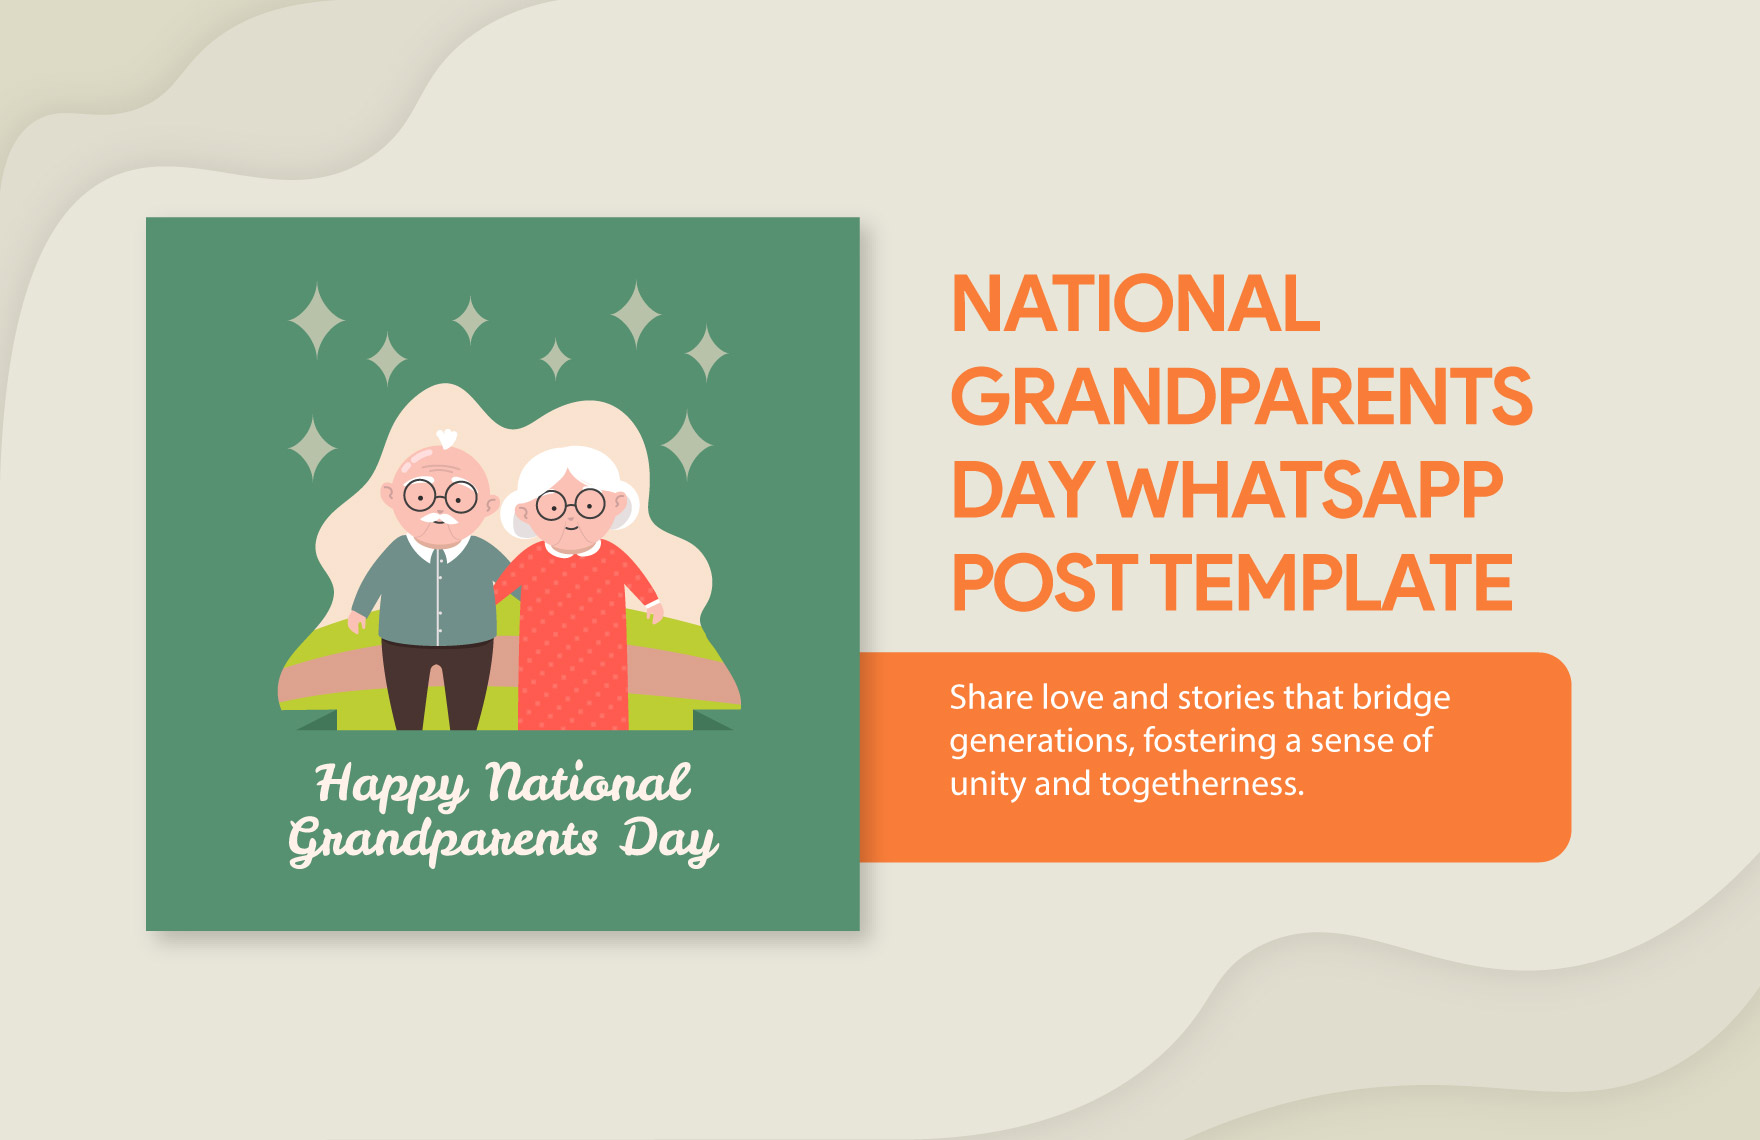 Free National Grandparents Day WhatsApp Post Template in Illustrator, PSD, PNG